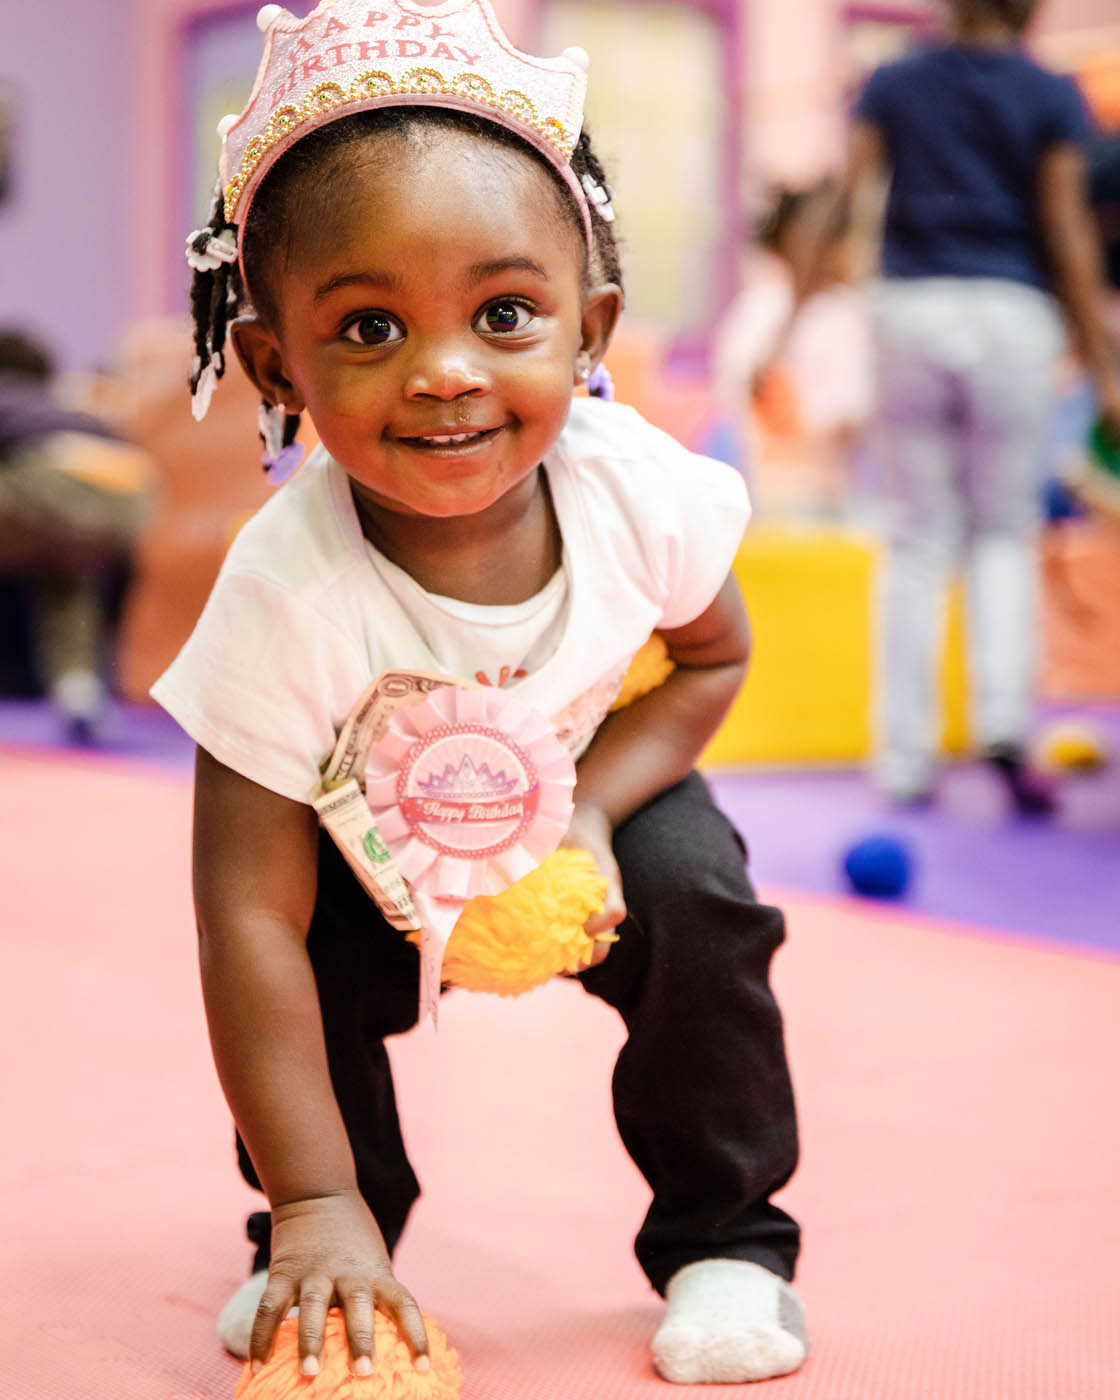 A toddler in a white shirt smiling at the camera, contact us today for toddler activities in Katy.